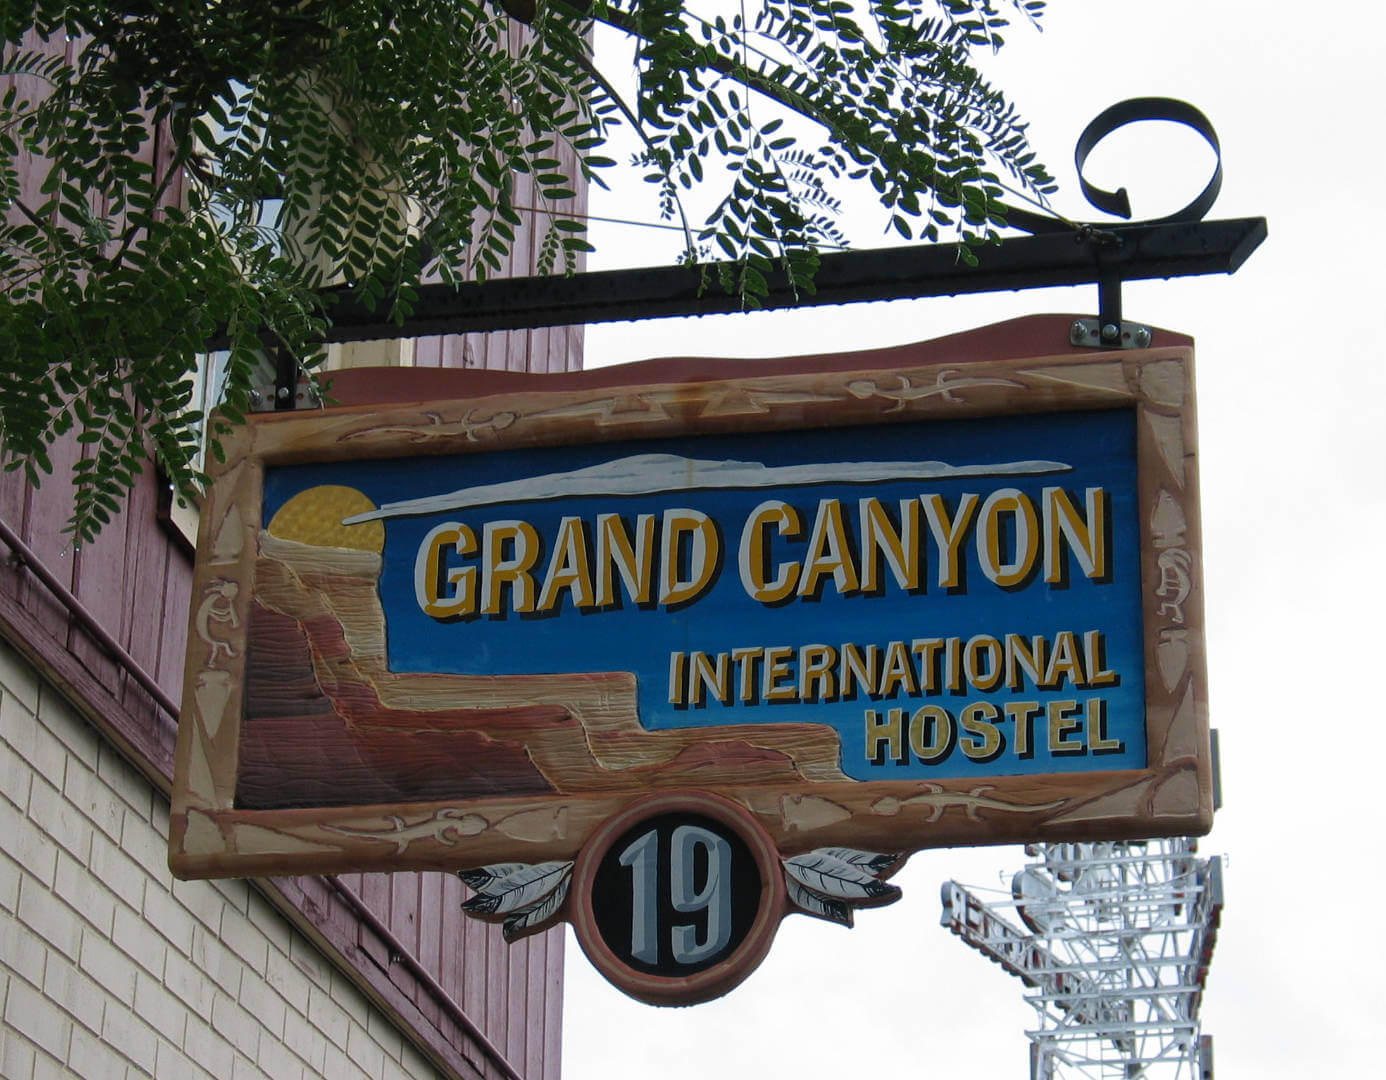 Sign for the Grand Canyon International Hostel in Flagstaff, Arizona. 